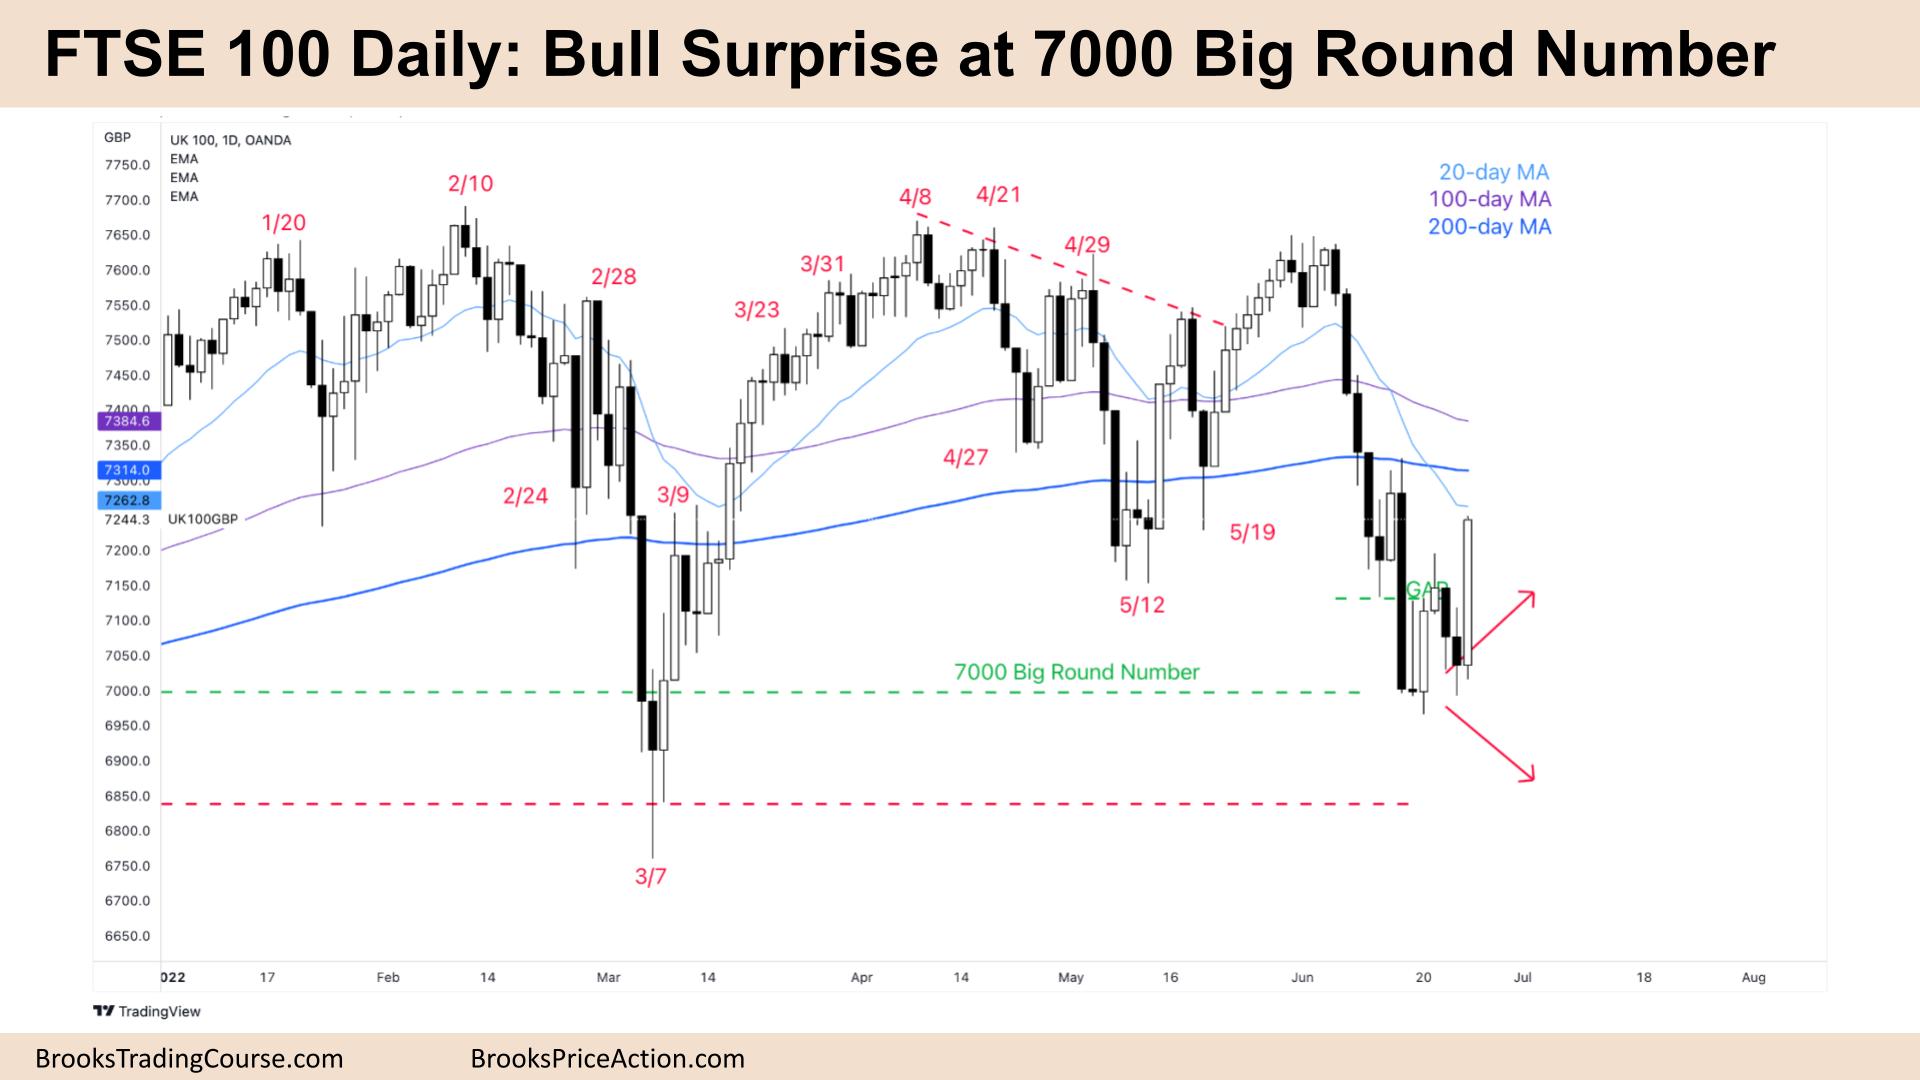 FTSE 100 Daily Chart Bull Surprise at 7000 Big Round Number